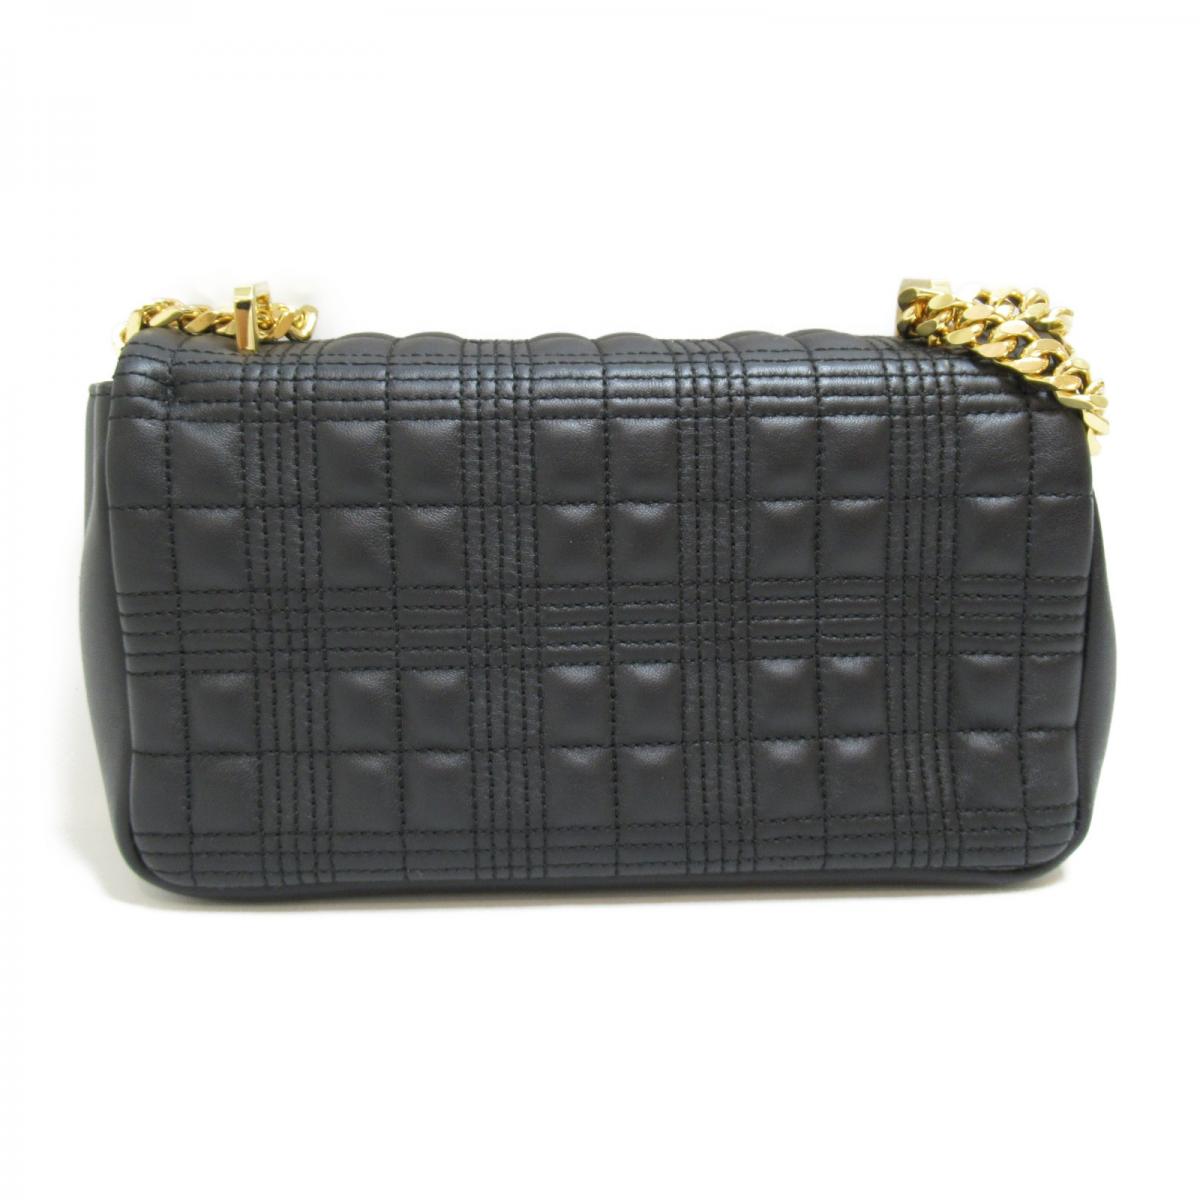 Lola Quilted Leather Chain Shoulder Bag